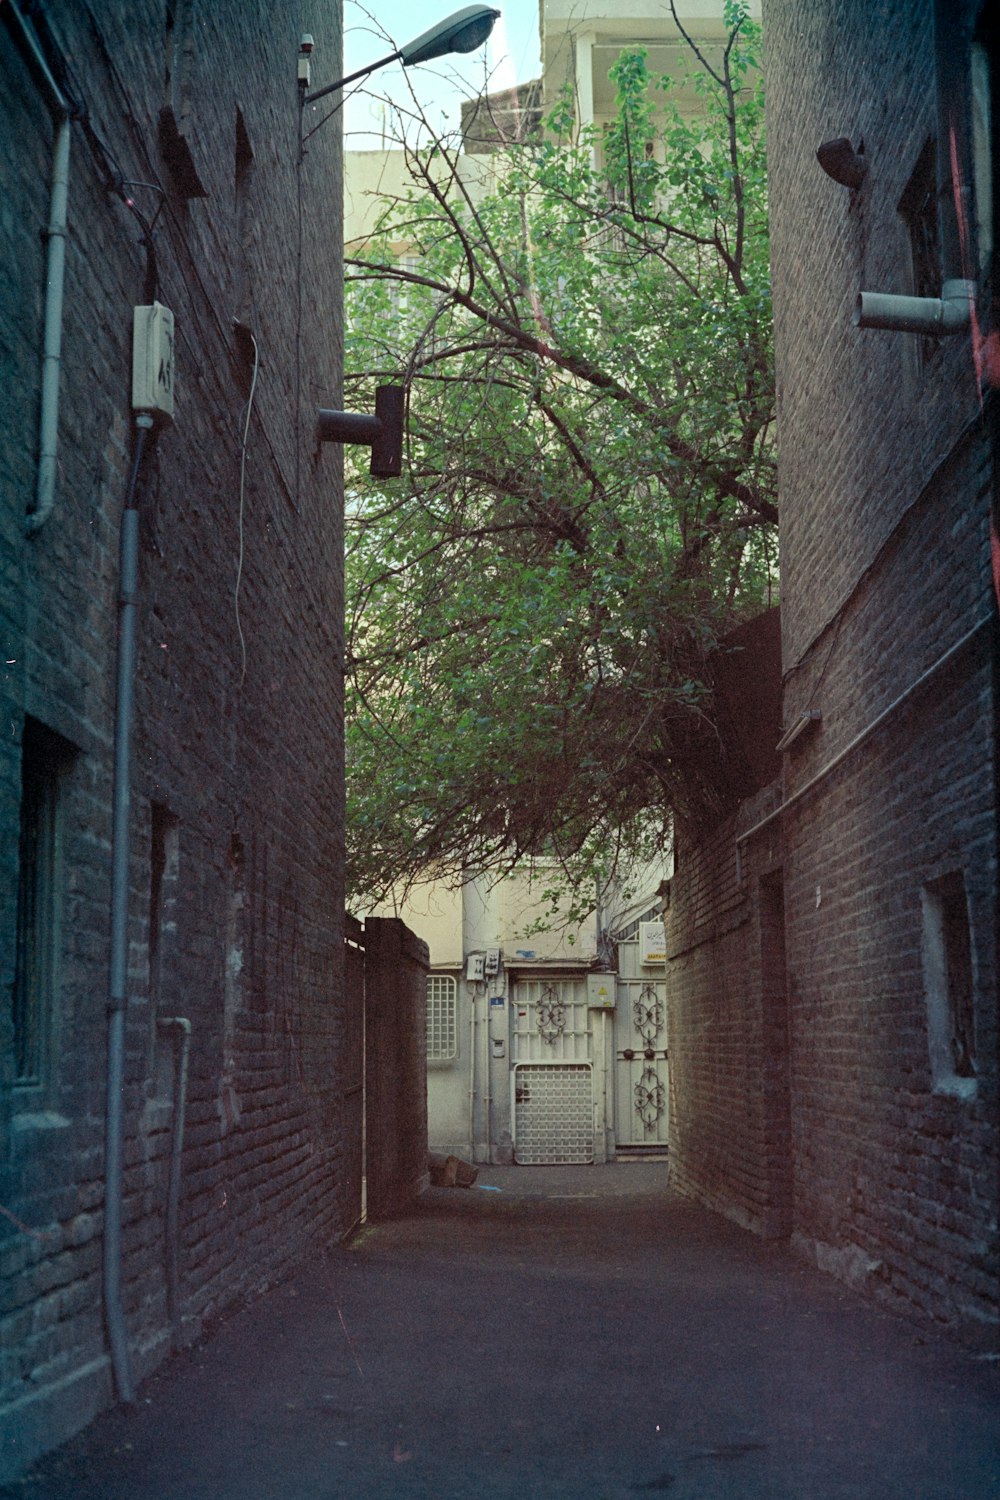 brown brick building with green trees